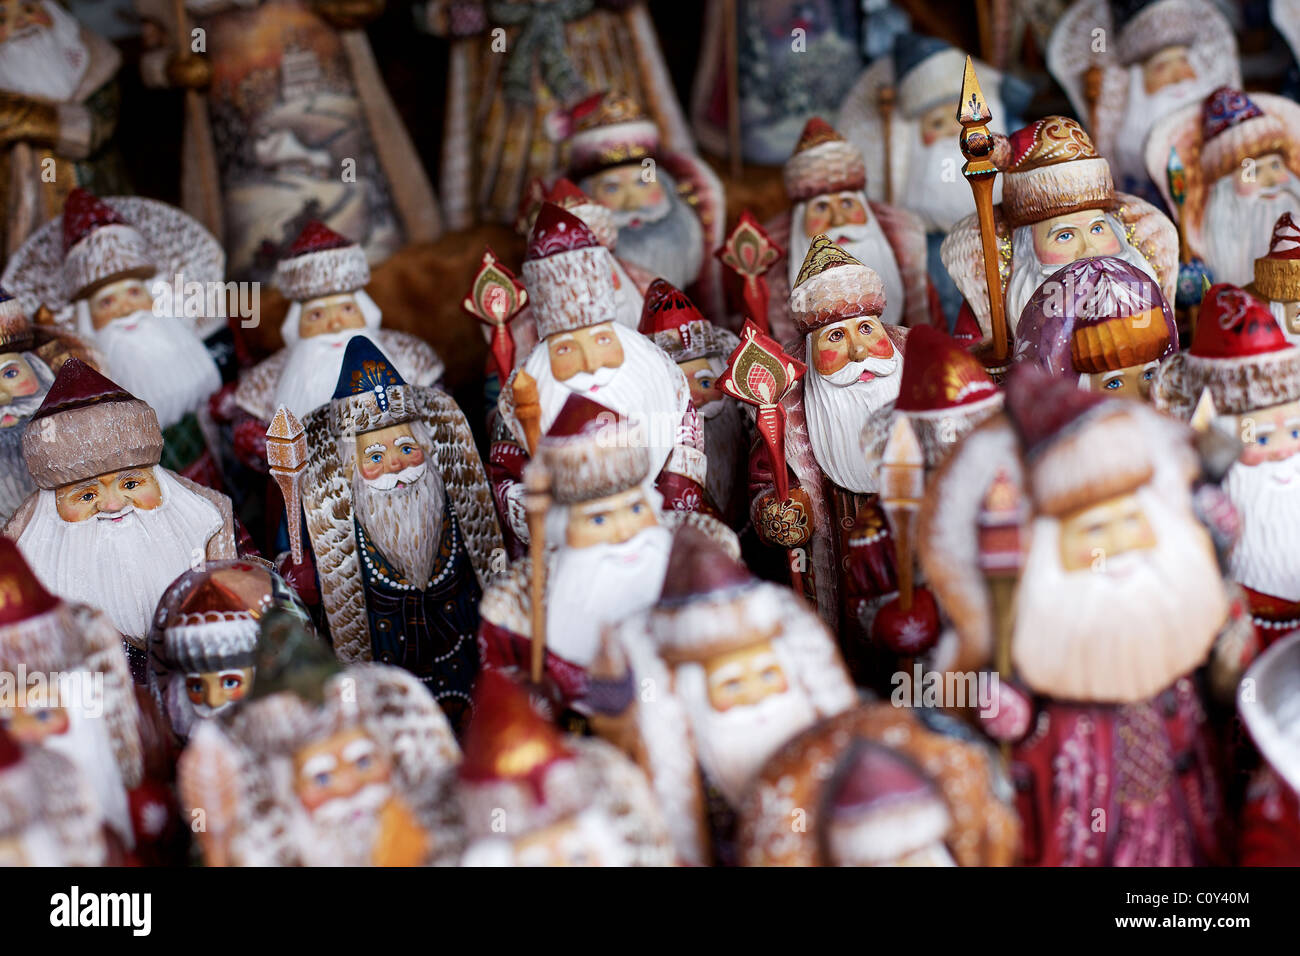 Hand carved and painted traditional Russian 'Santa Claus' figures on sale in Izmaylovo market, Moscow, Russia Stock Photo